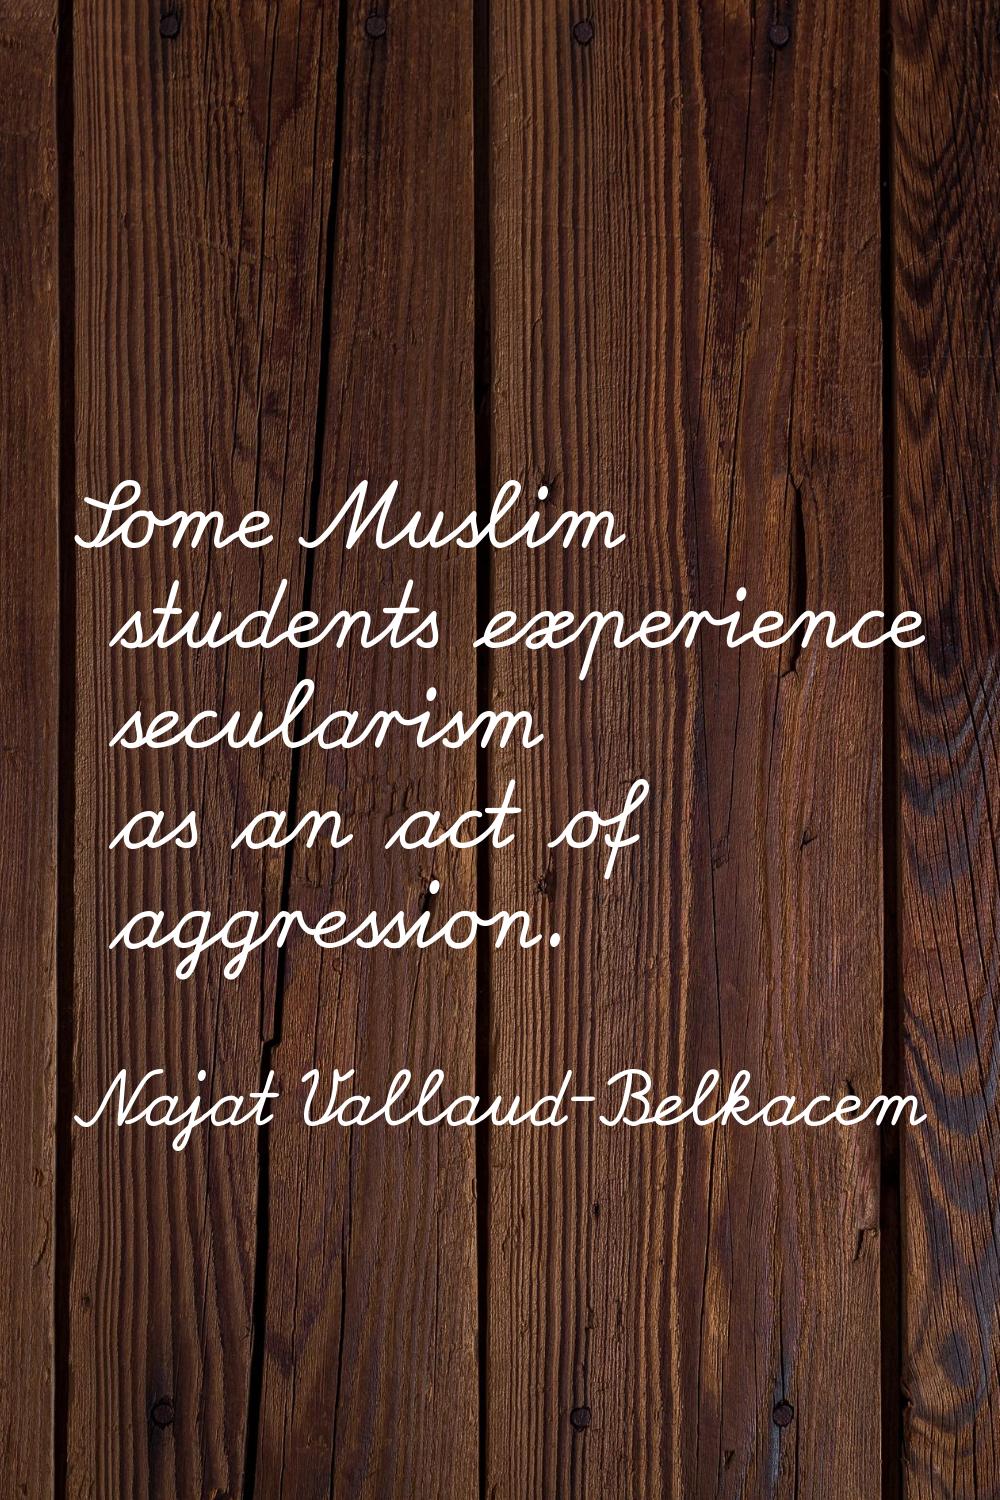 Some Muslim students experience secularism as an act of aggression.